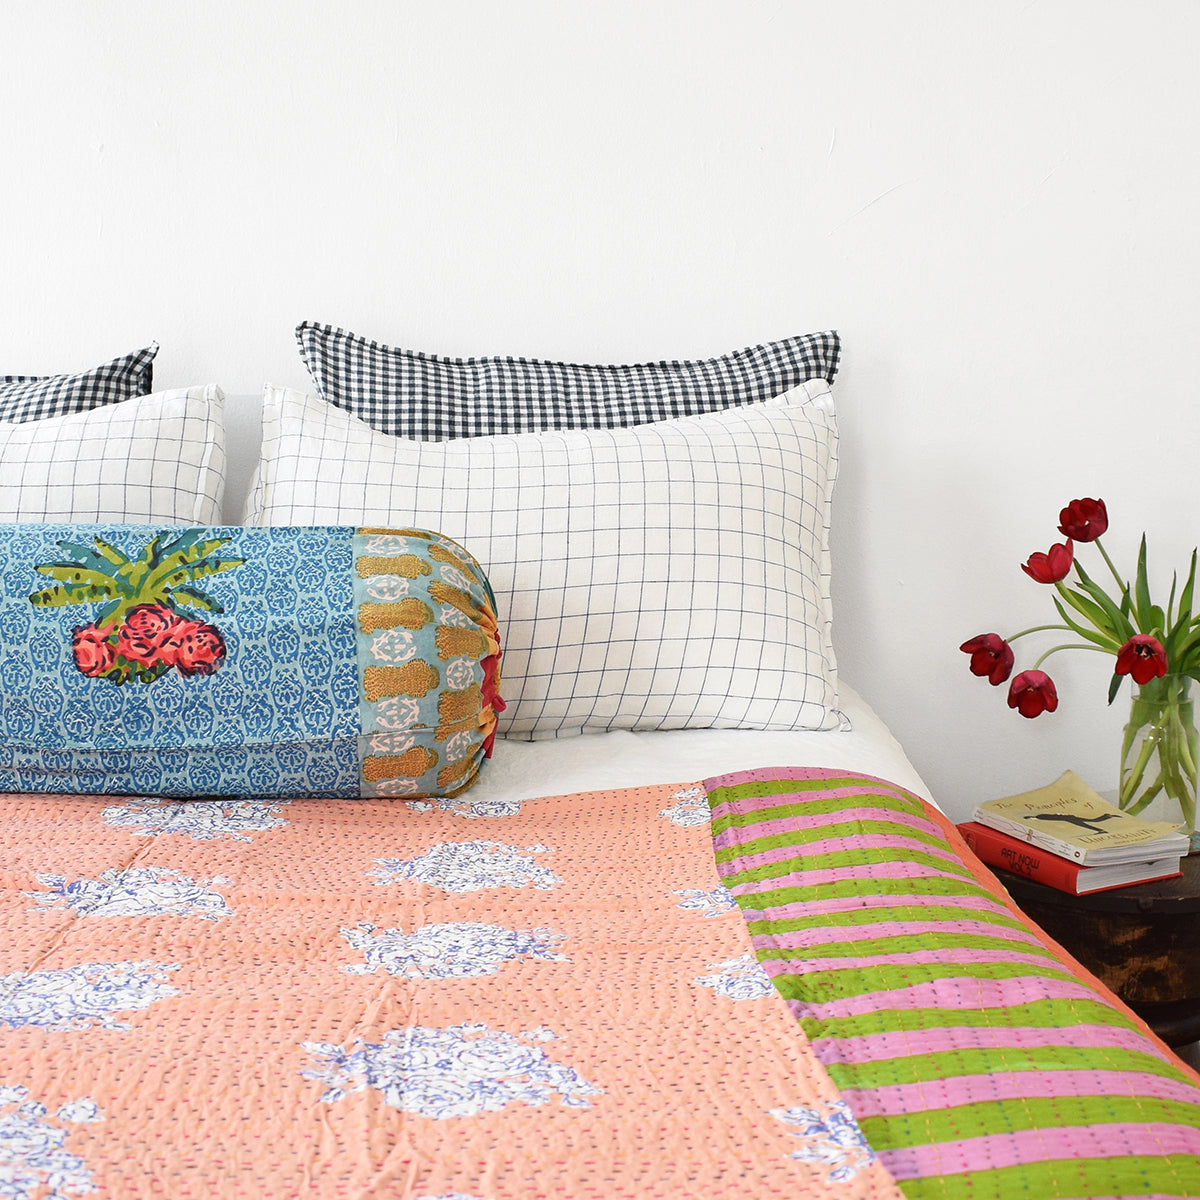 Linge Particulier Navy Check Standard Linen Pillowcase Sham with Lisa Corti gudri kantha quilt and Lisa Corti pillow for a colorful linen bedding look in blue check - Collyer&#39;s Mansion